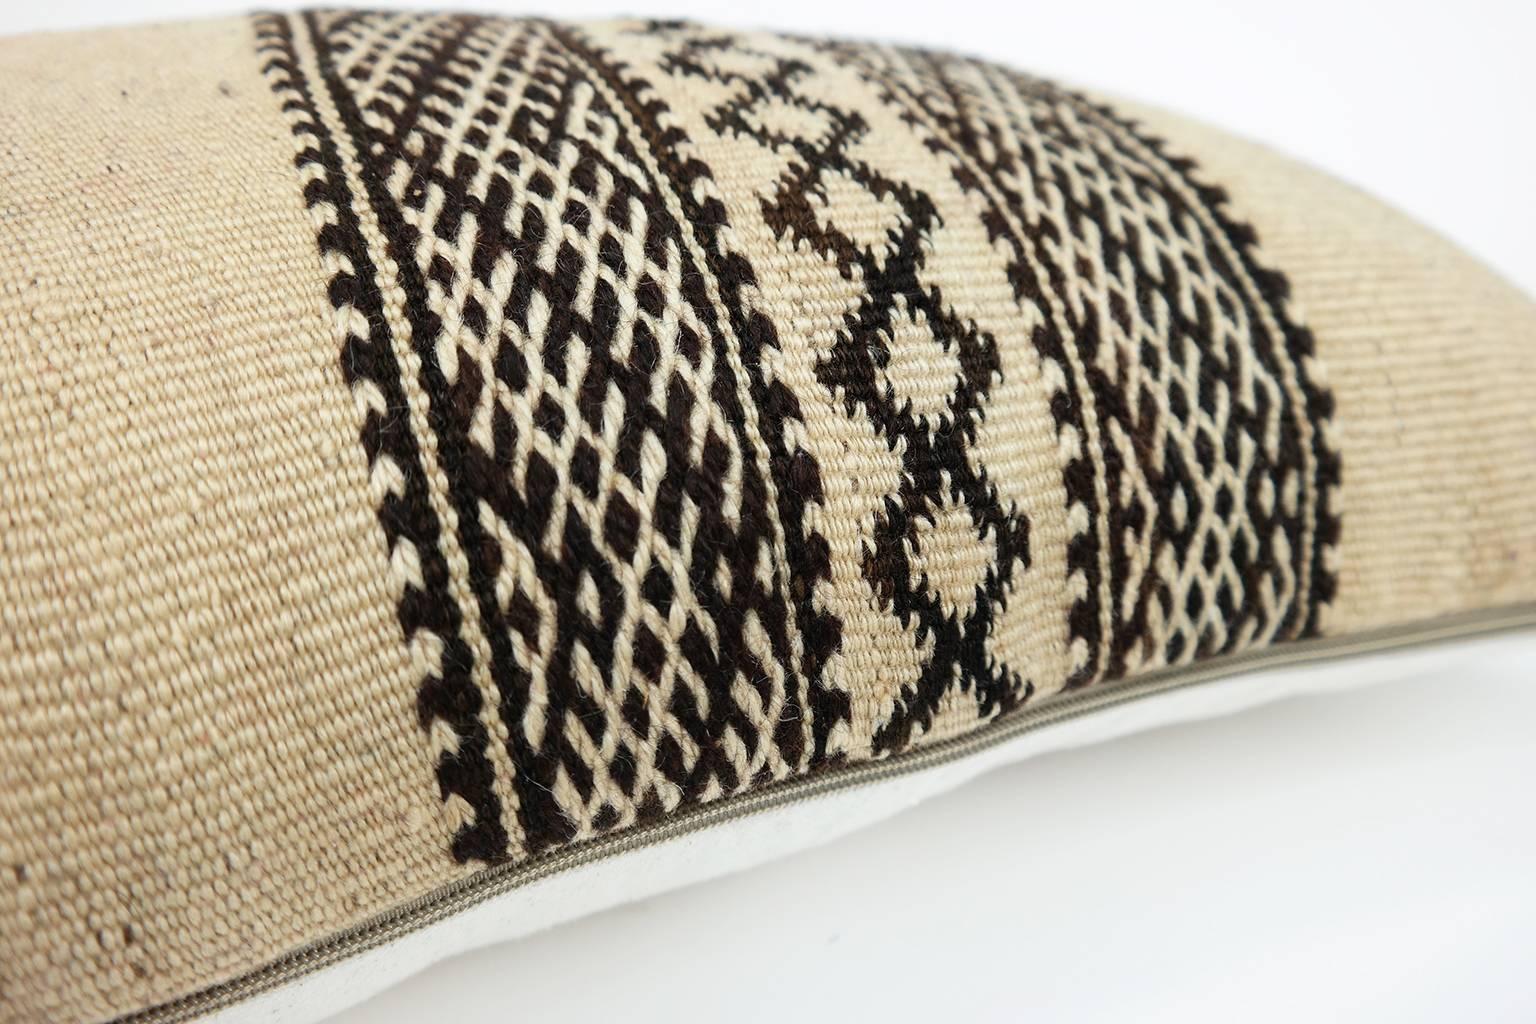 A stunning one-of-a-kind kilim pillow, custom made from a vintage Moroccan kilim Zanafi hanbel rug, searched and selected by ourselves. Vintage Zanafi rugs in good quality are rare and difficult to find. 

The undyed brown and creamy wool Zanafi